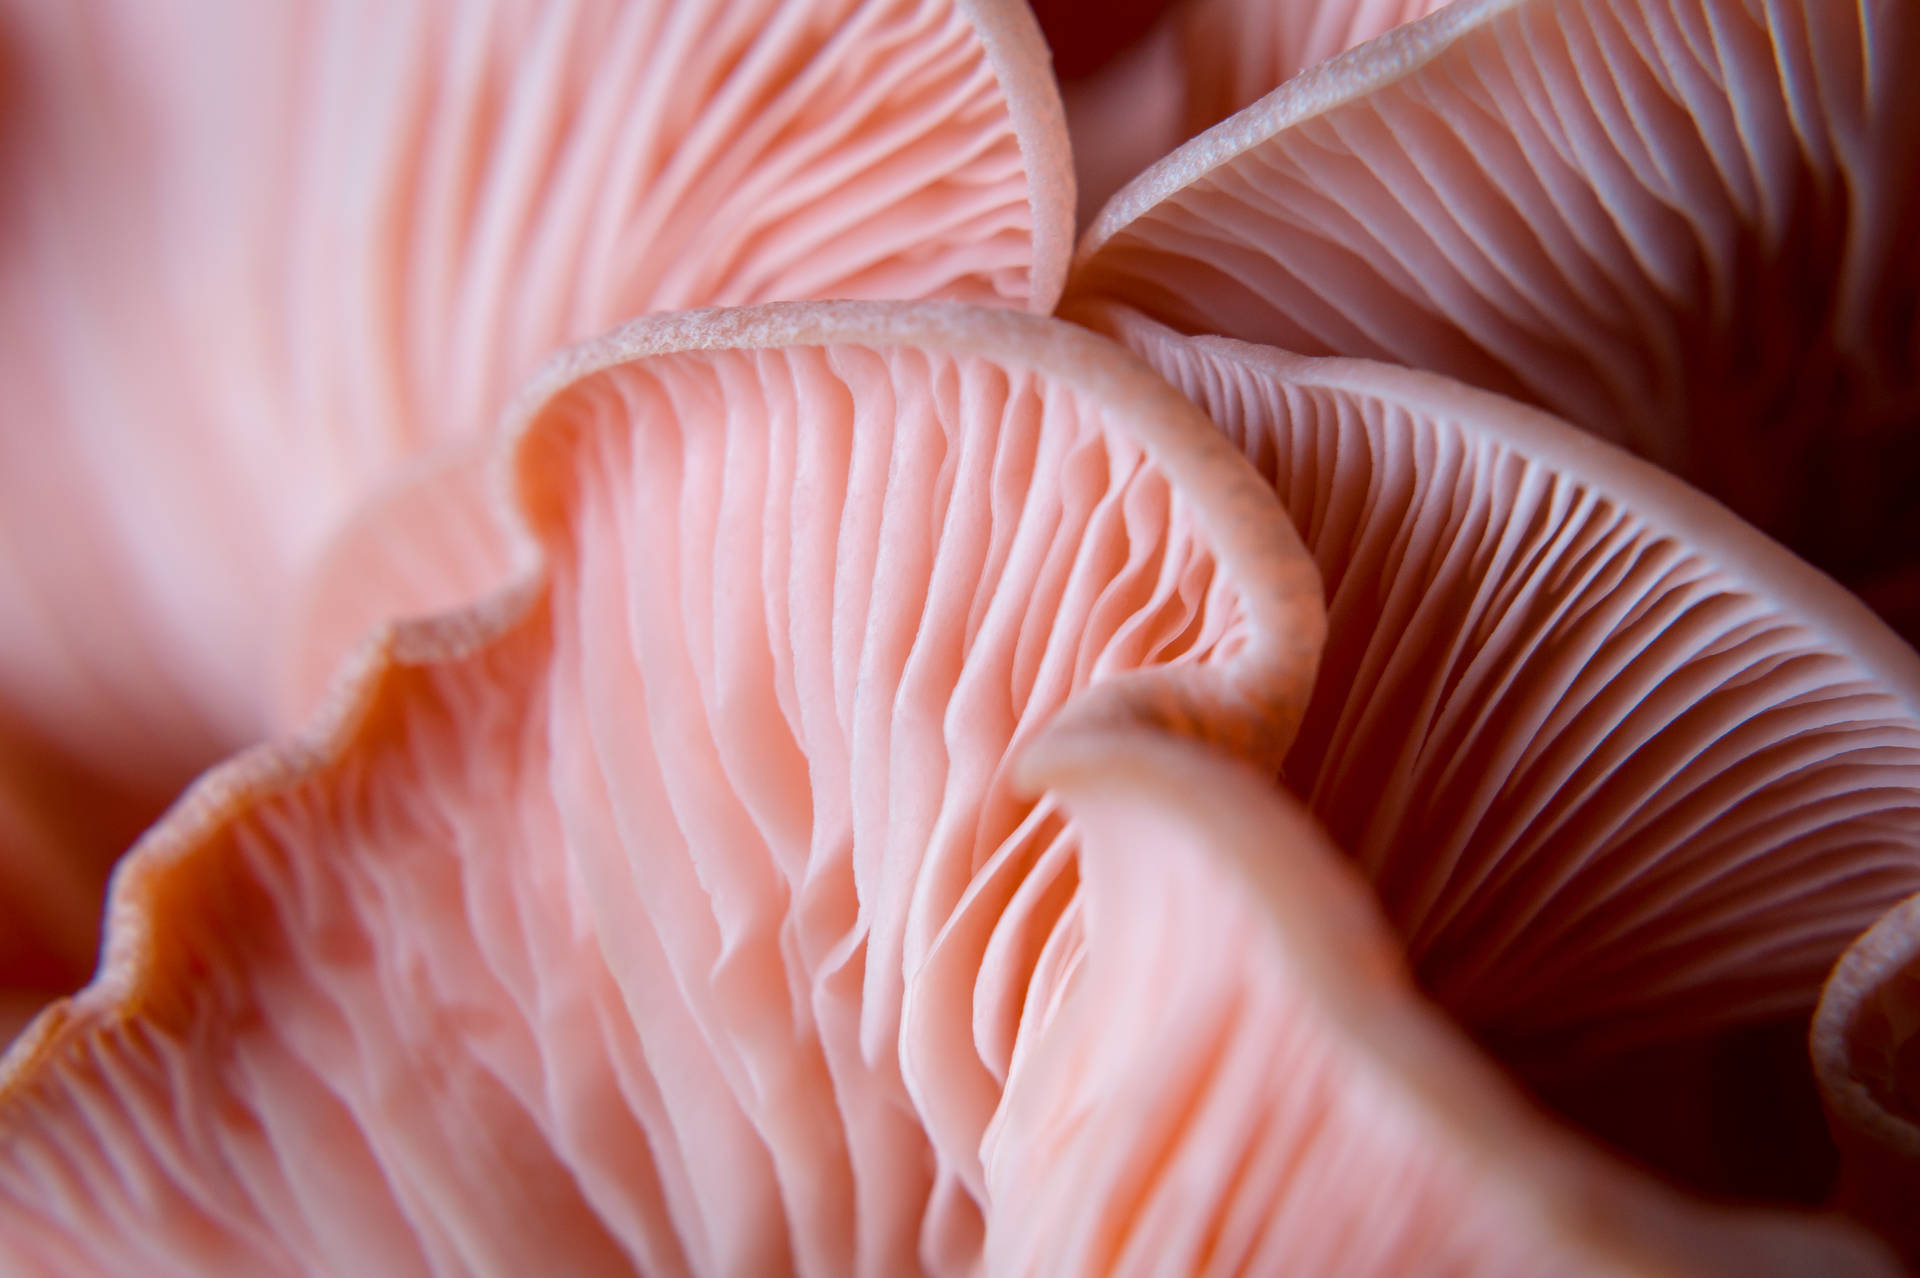 Mushroom 5456X3632 Wallpaper and Background Image